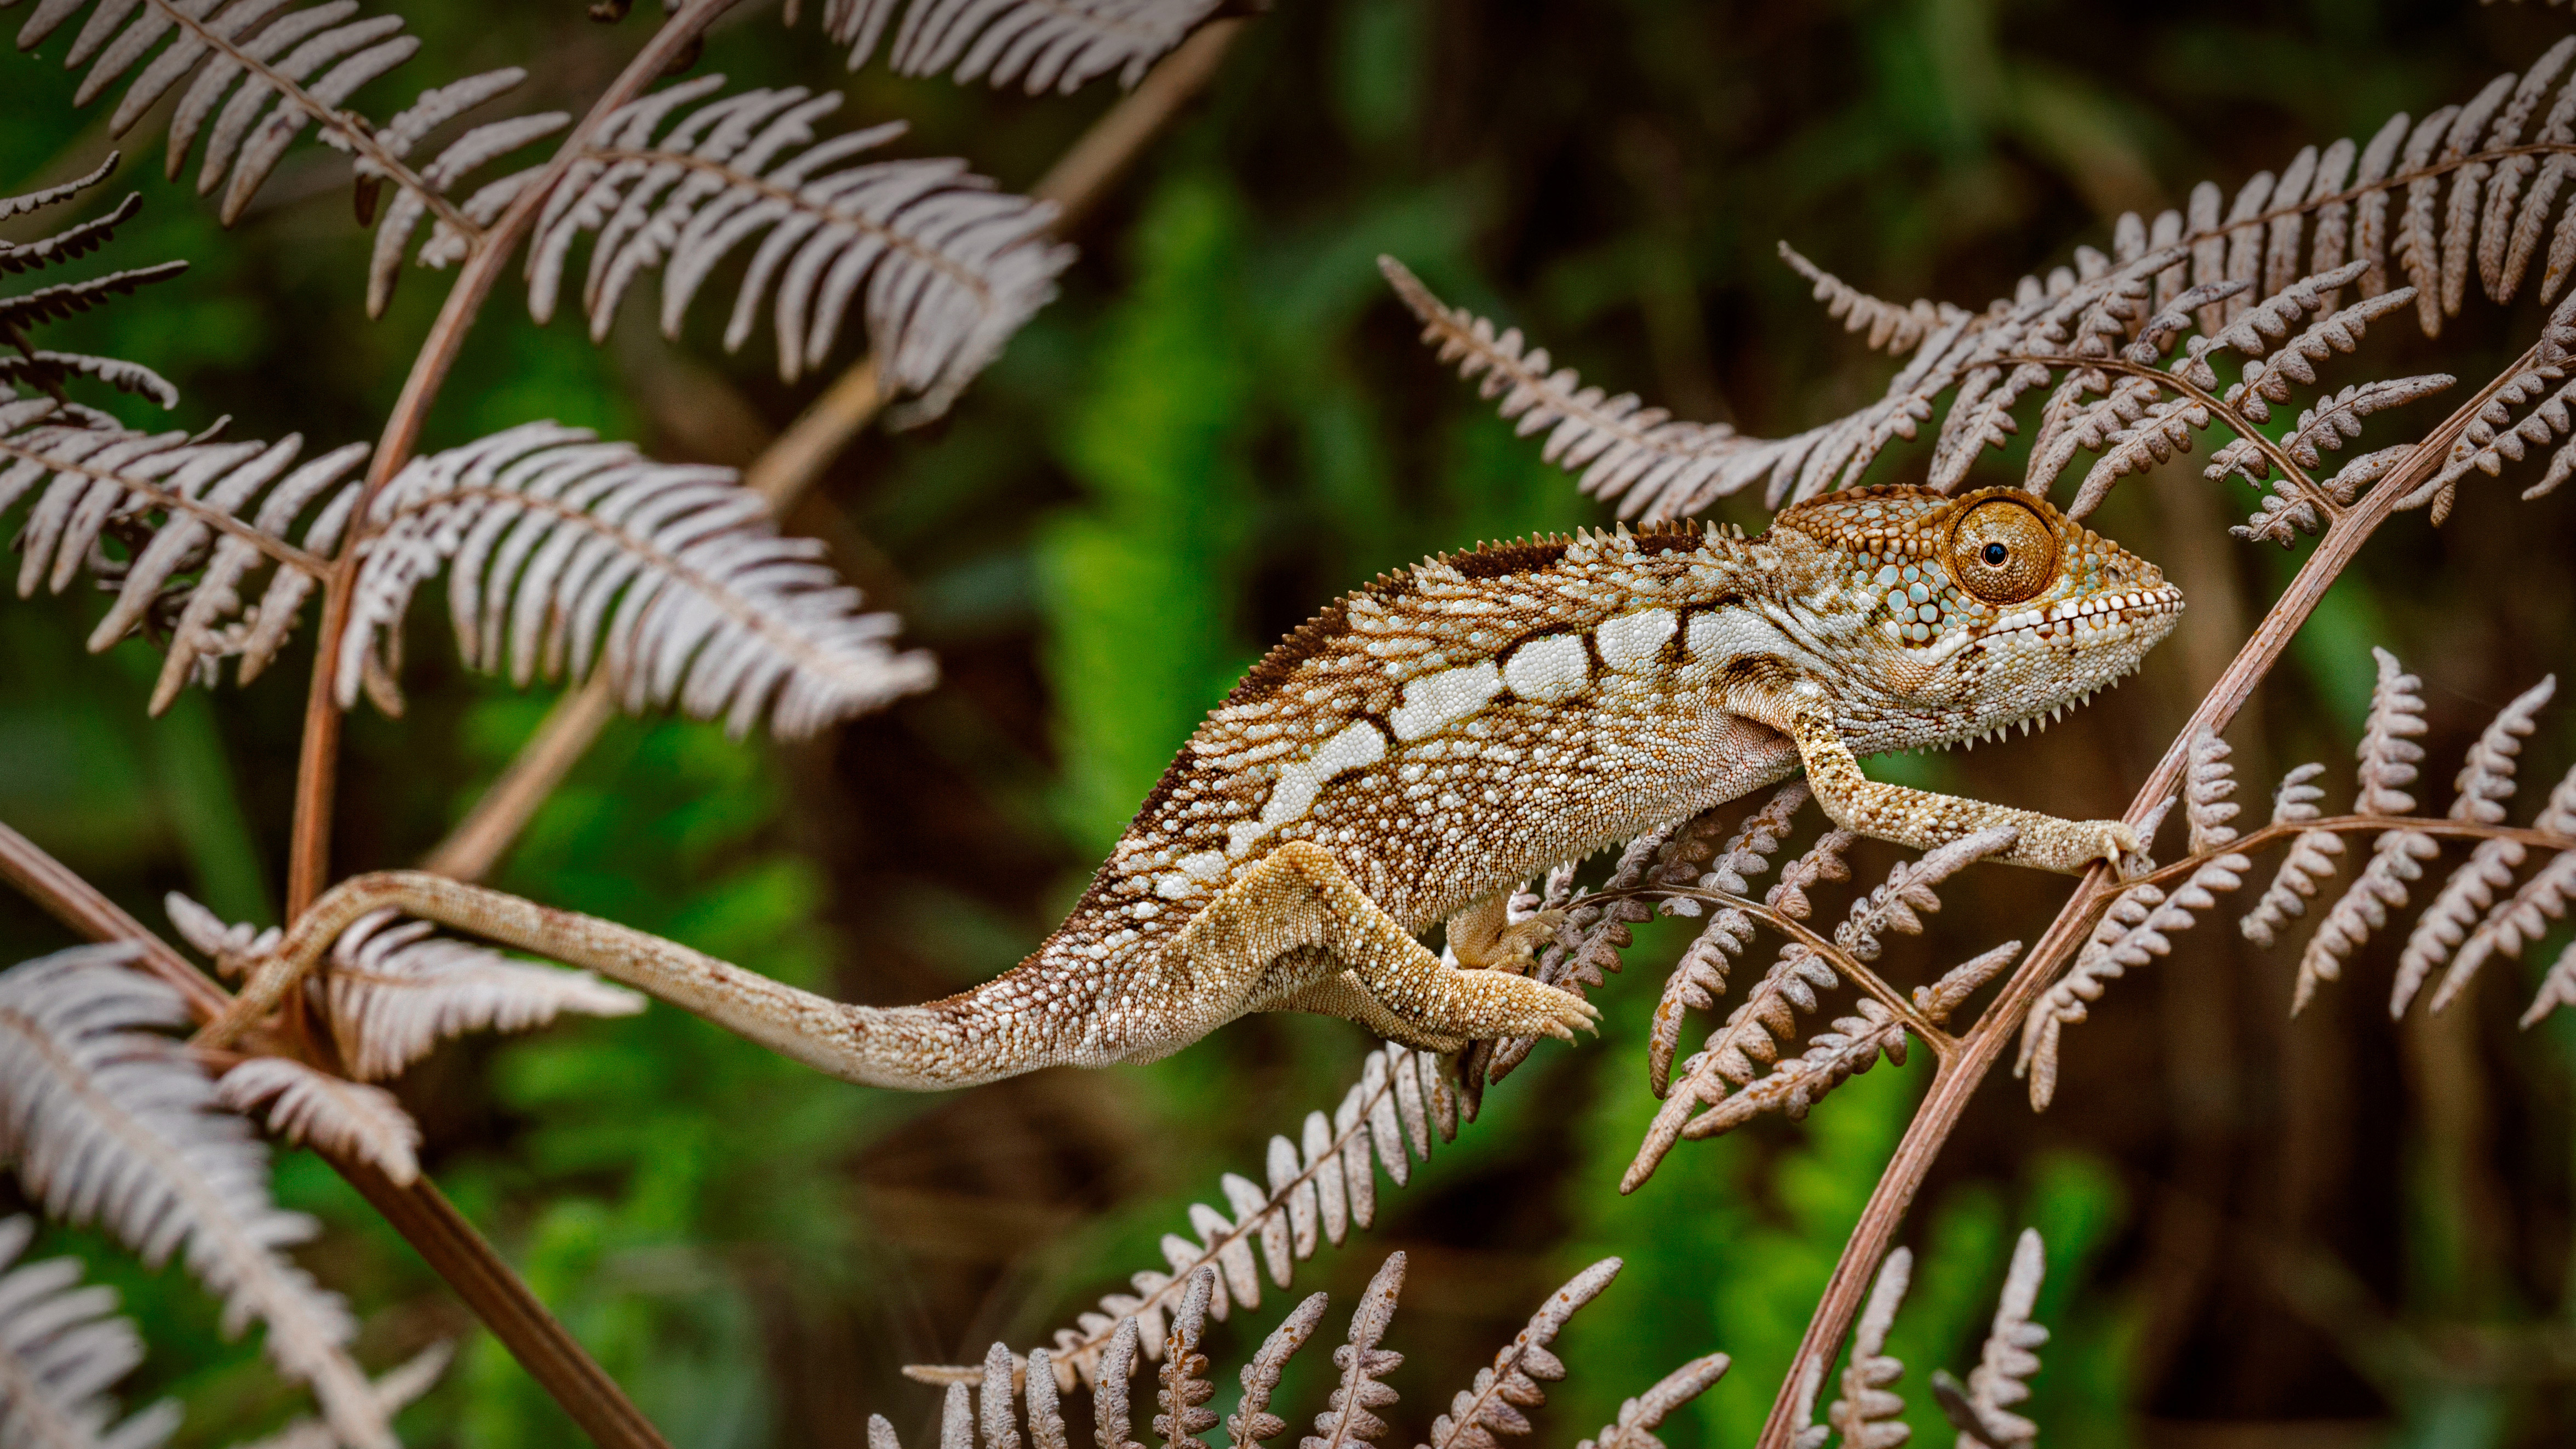 Panther Chameleon in Amber Mountain National Park, Madagascar by Christian Ziegler